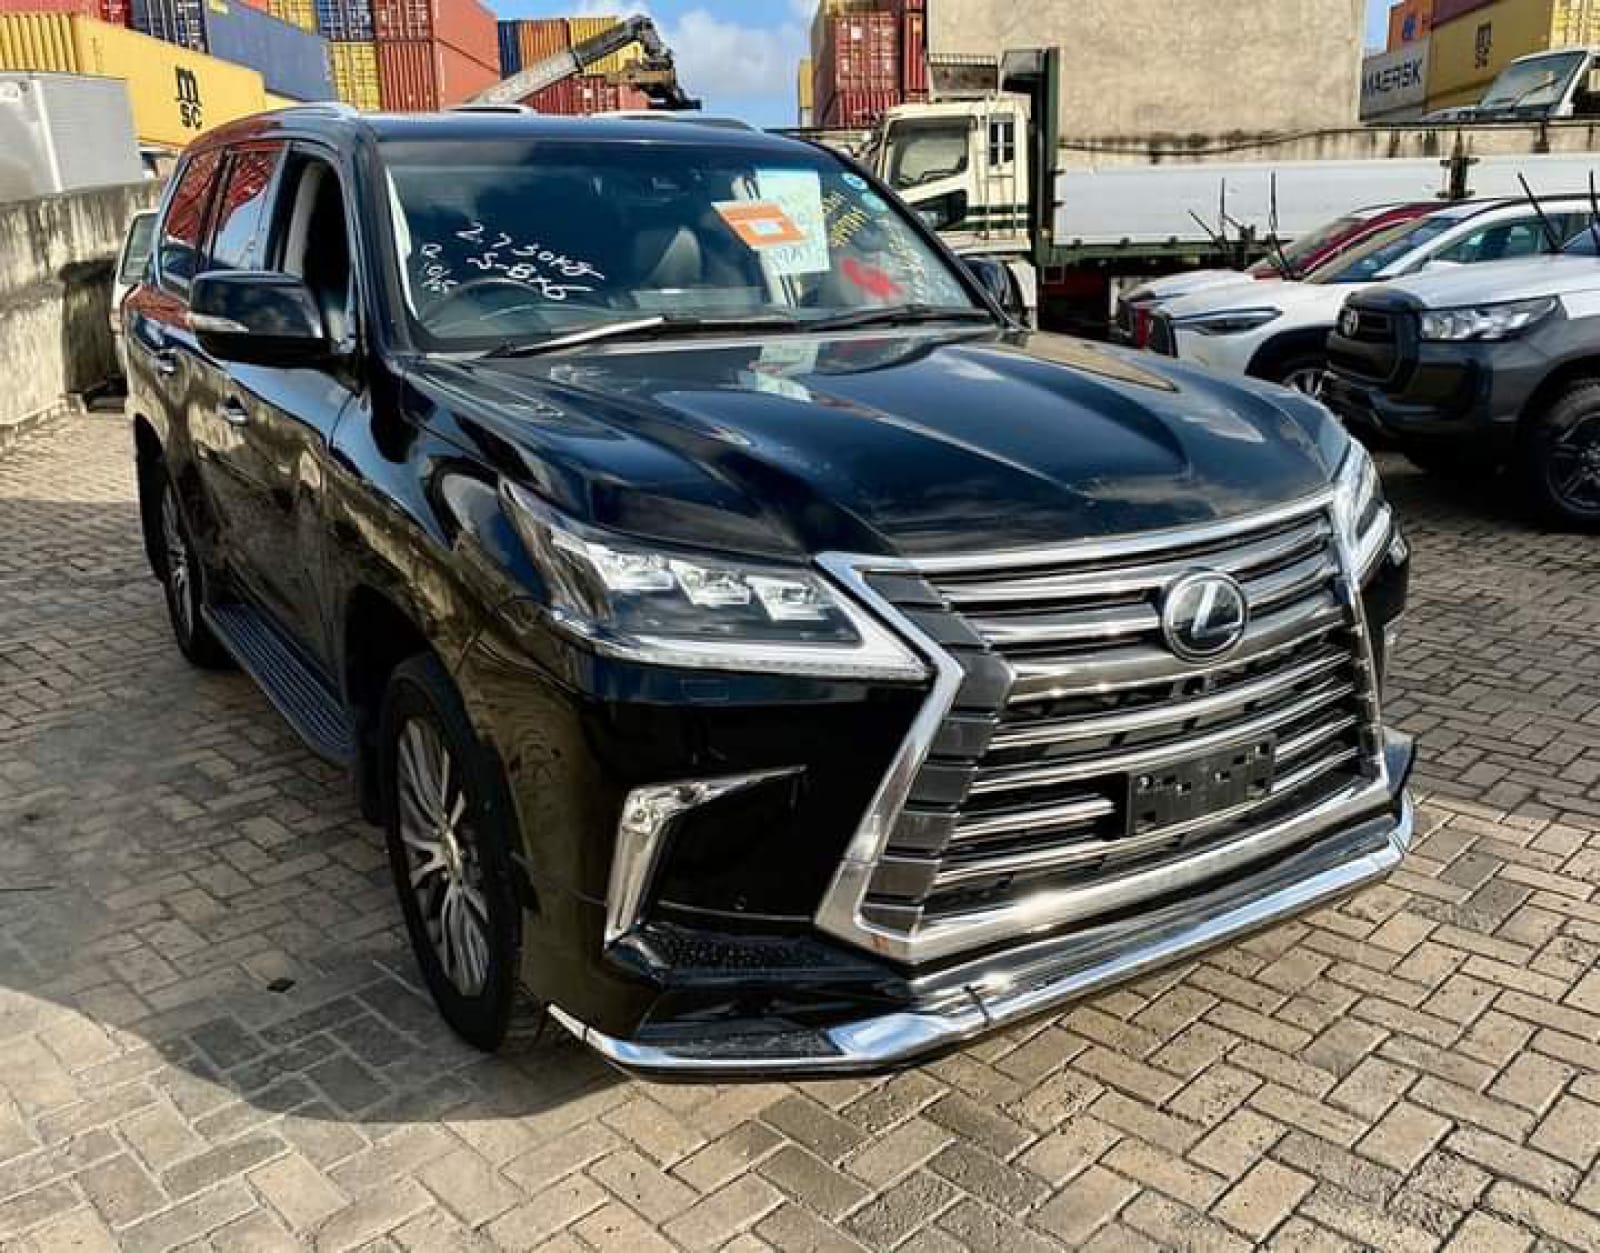 Cars For Sale/Vehicles Cars-LEXUS LX 570 Fully Loaded HIRE PURCHASE OK EXCLUSIVE CHEAPEST! 26